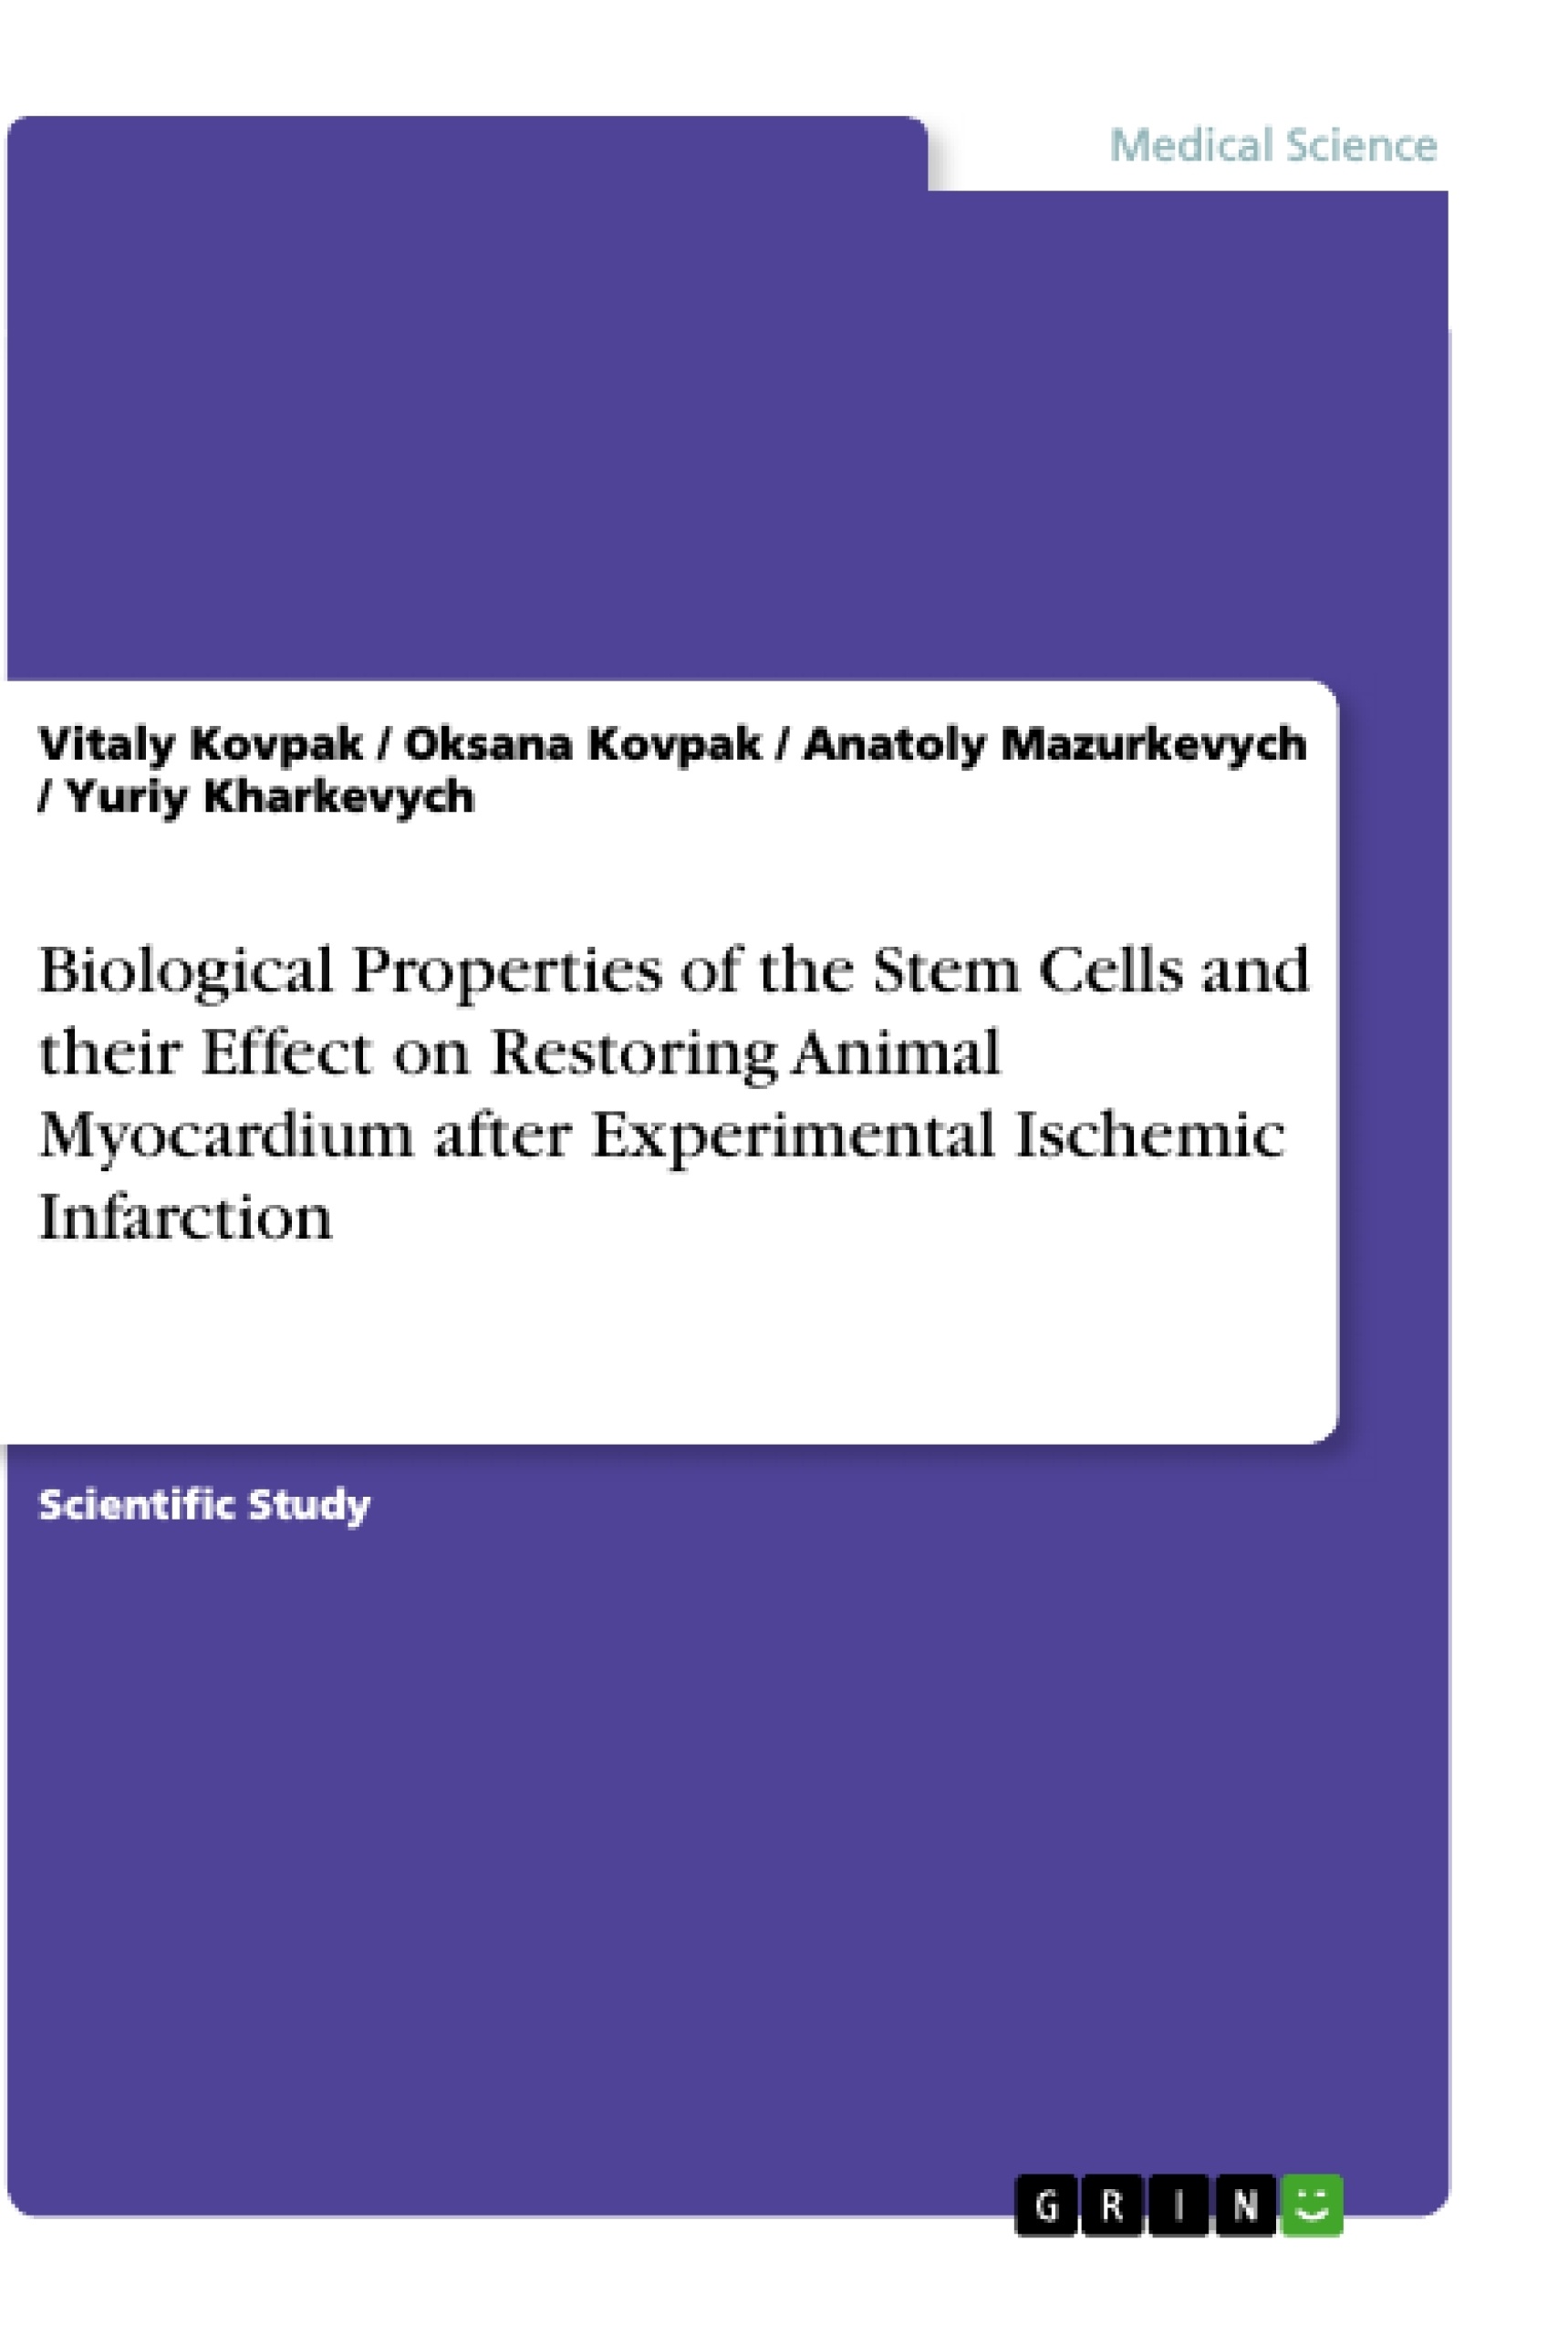 Title: Biological Properties of the Stem Cells and their Effect on Restoring Animal Myocardium after Experimental Ischemic Infarction